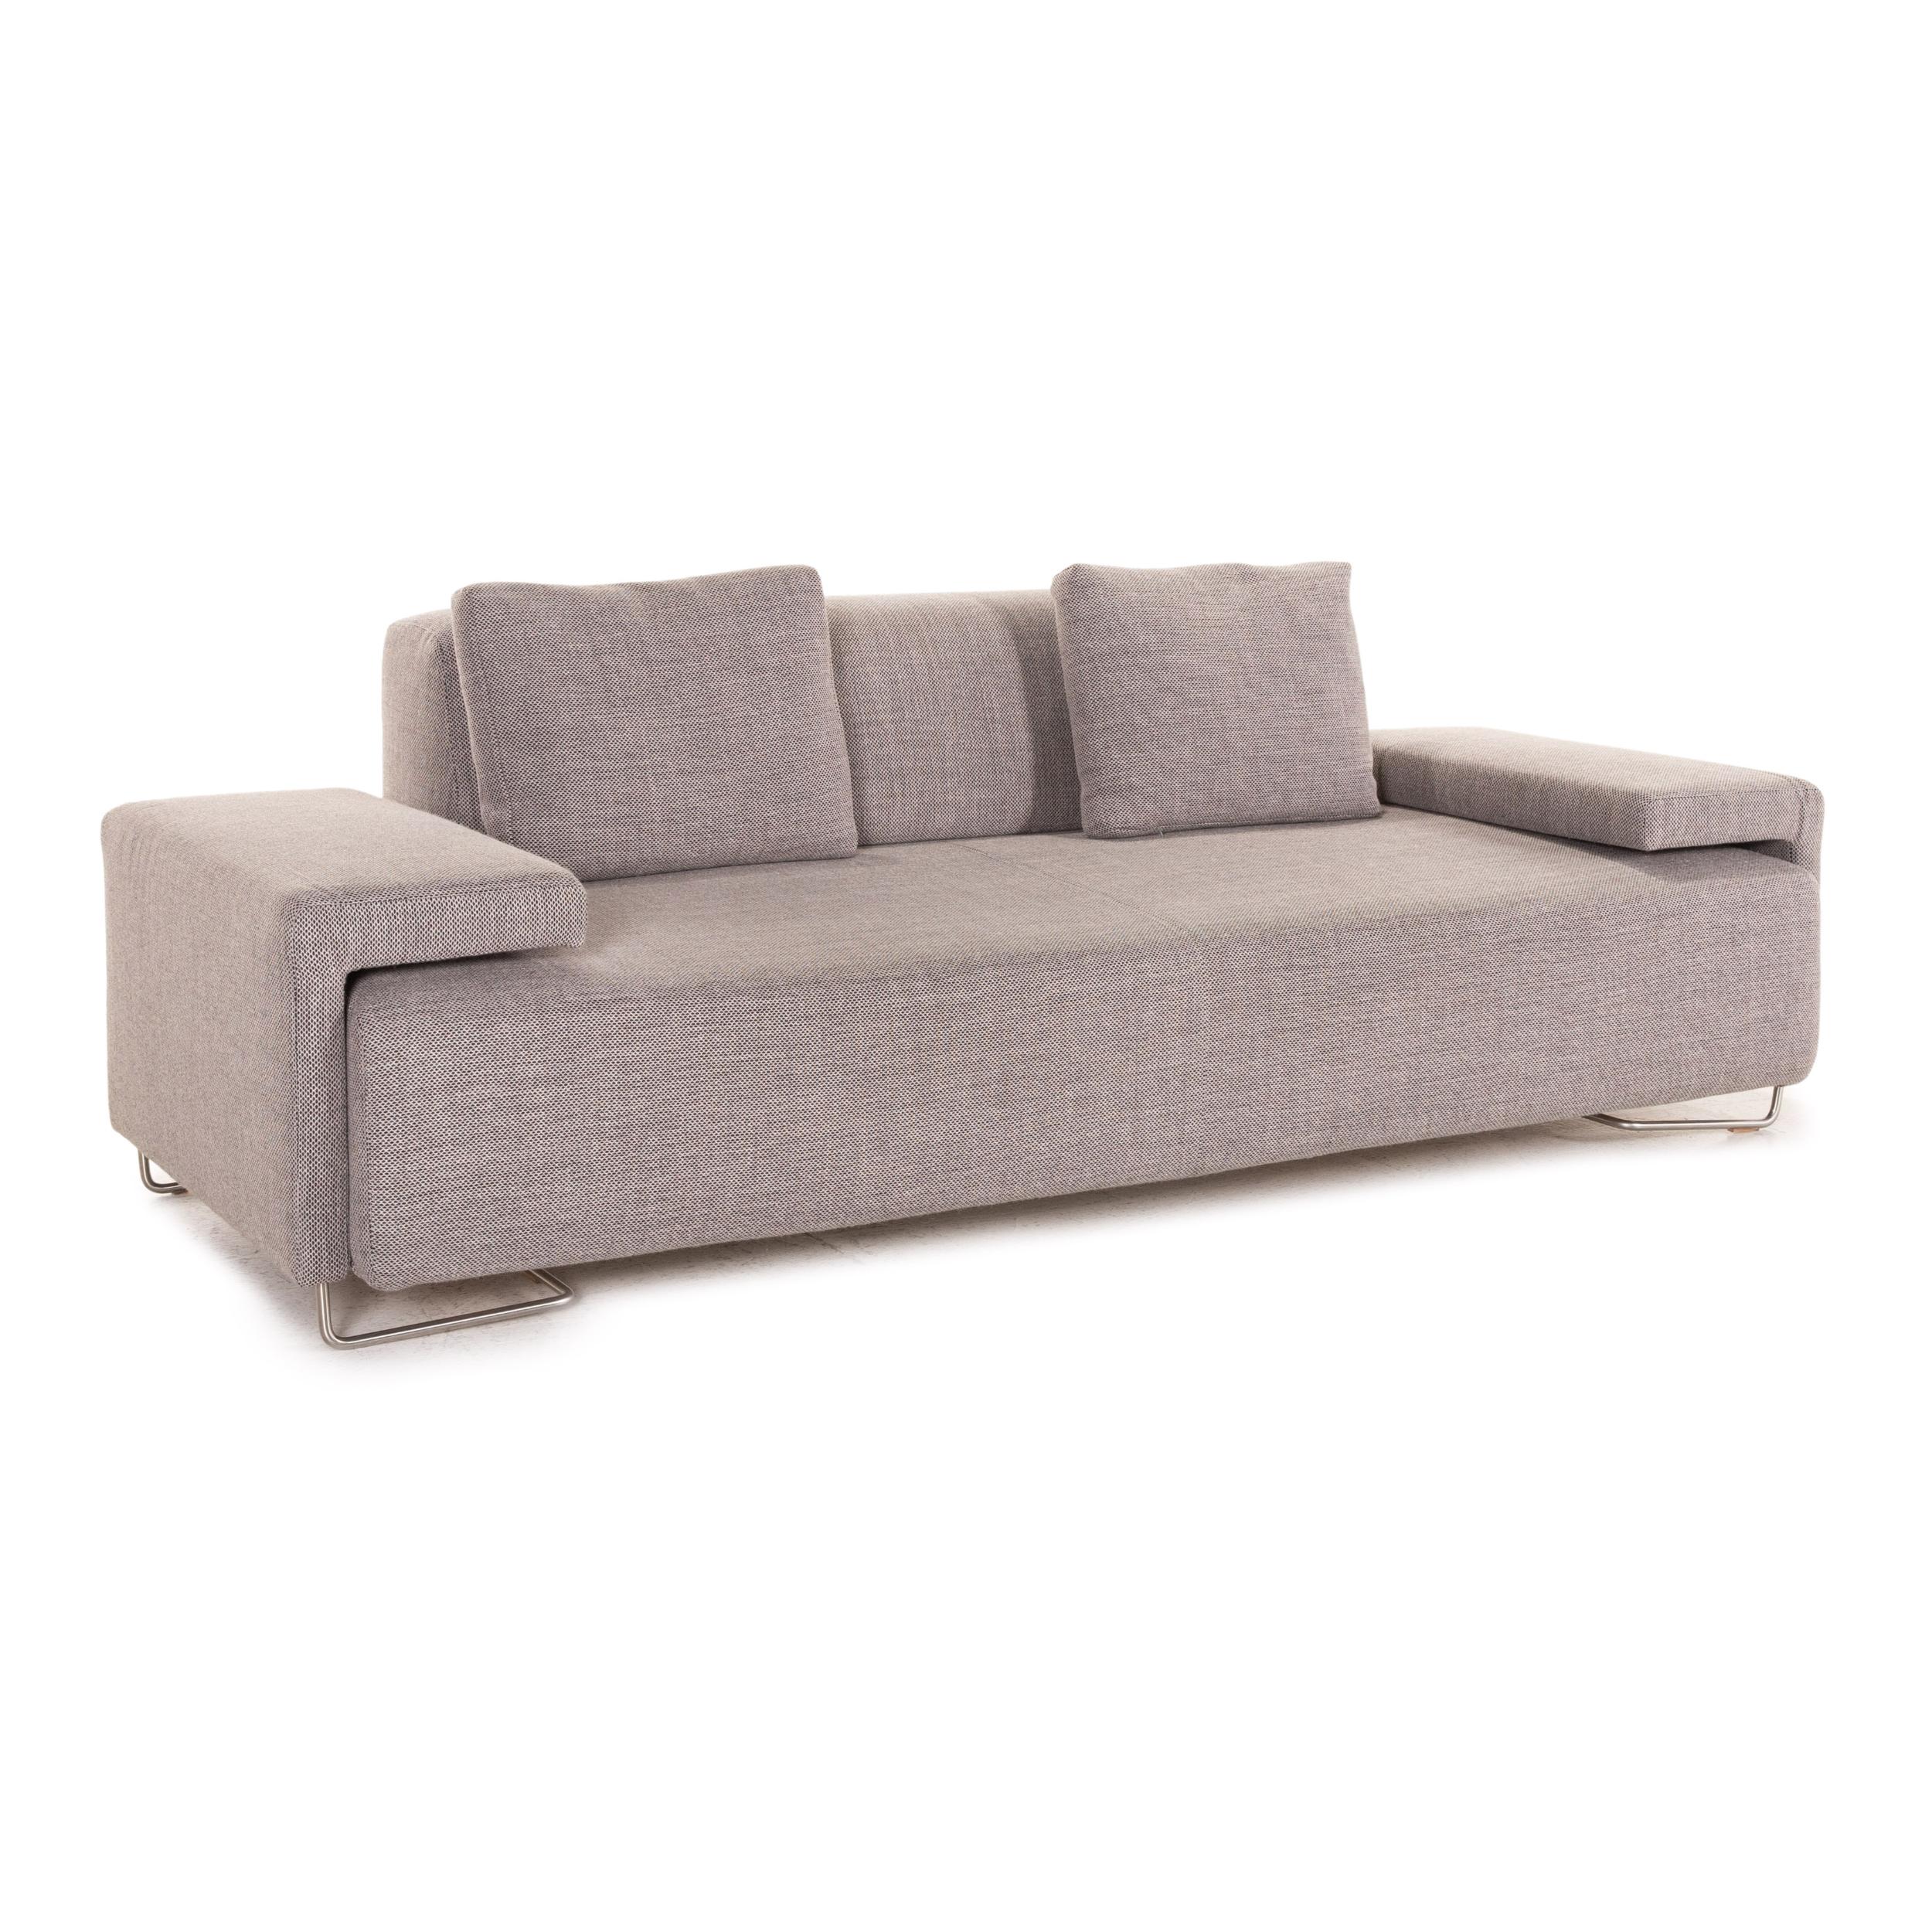 Contemporary Moroso Lowland Fabric Sofa Three Seater Gray Couch For Sale